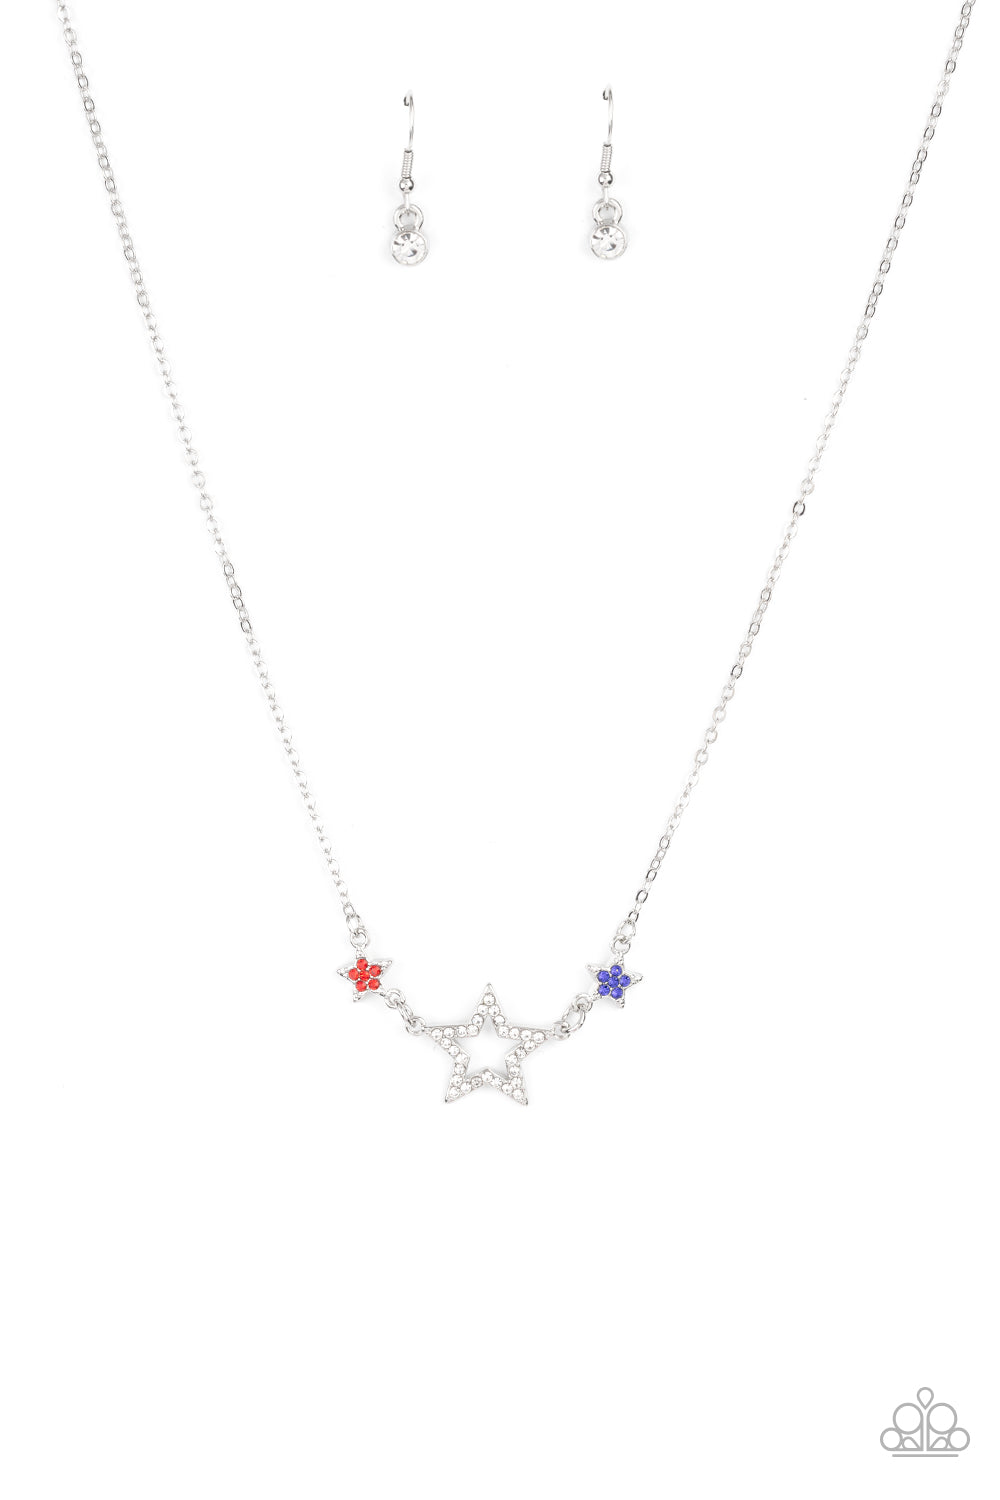 United We Sparkle - Multi White, Blue, Red Star Paparazzi Necklace & matching earrings